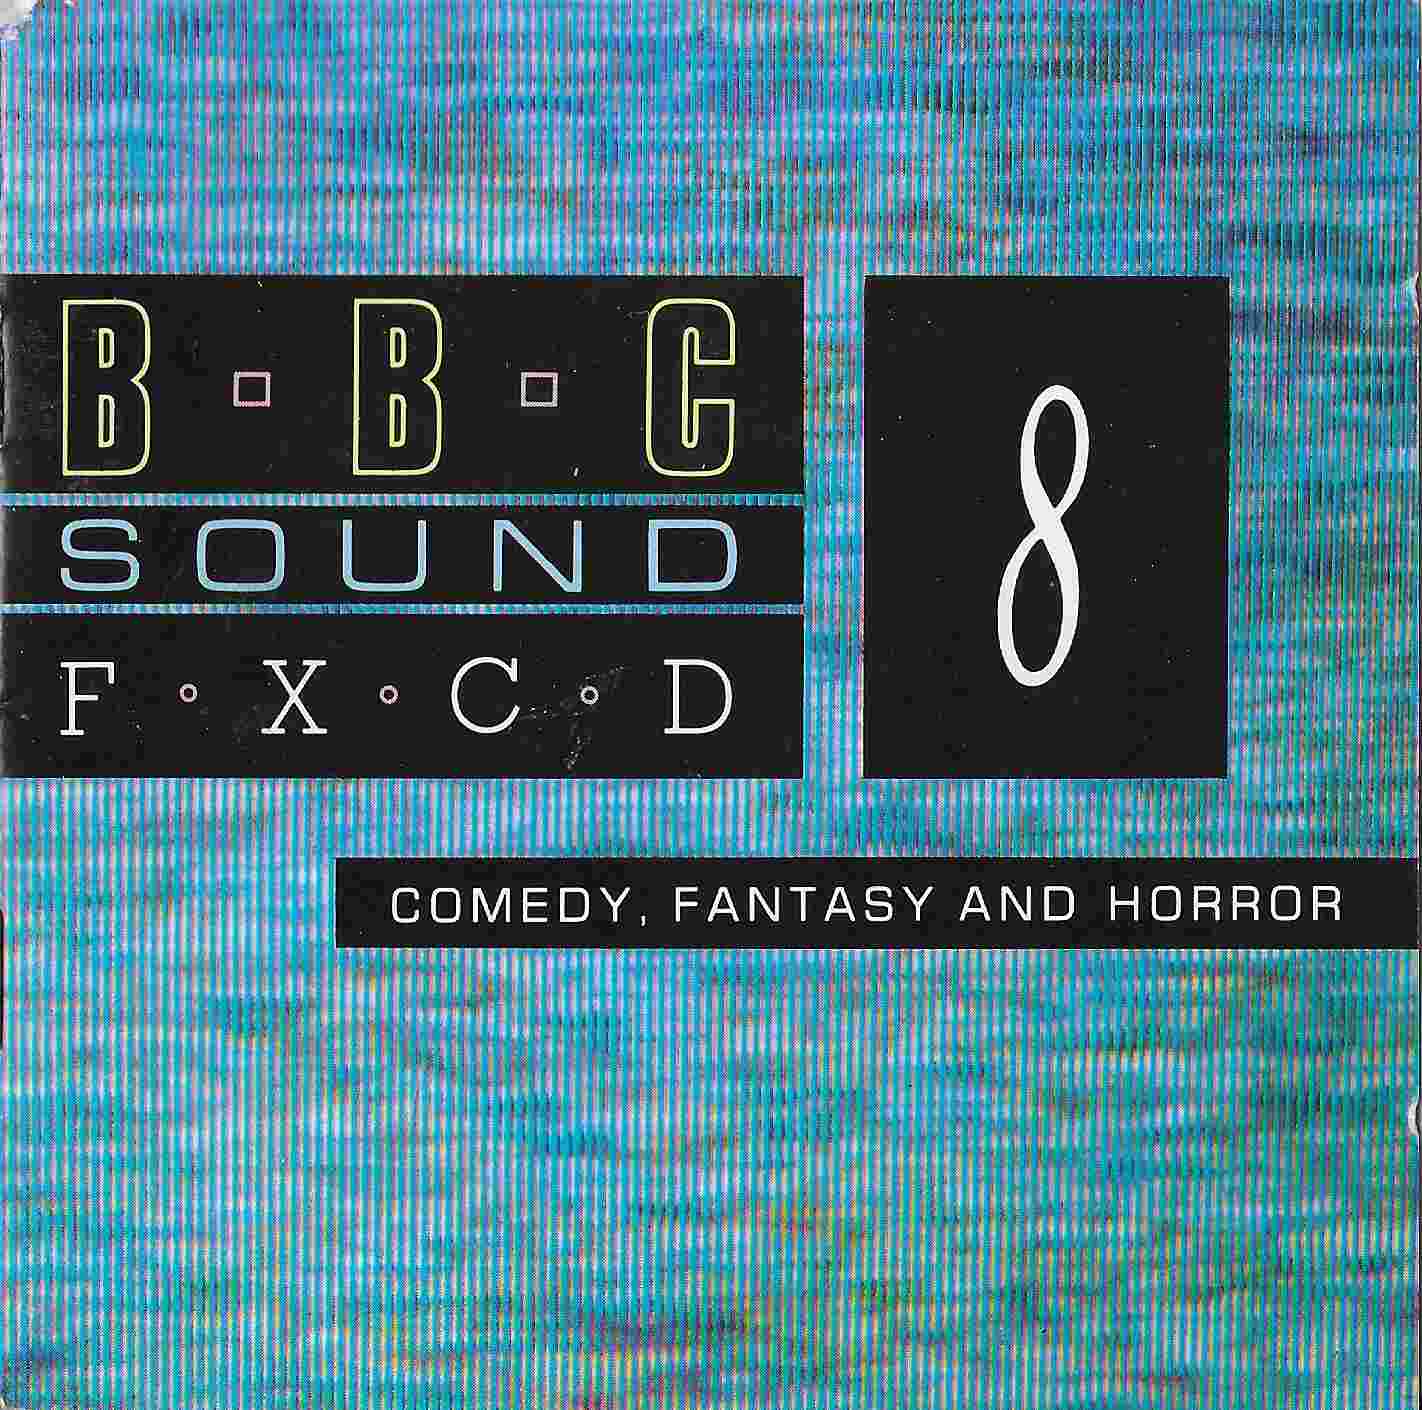 Front cover of BBCCD SFX008